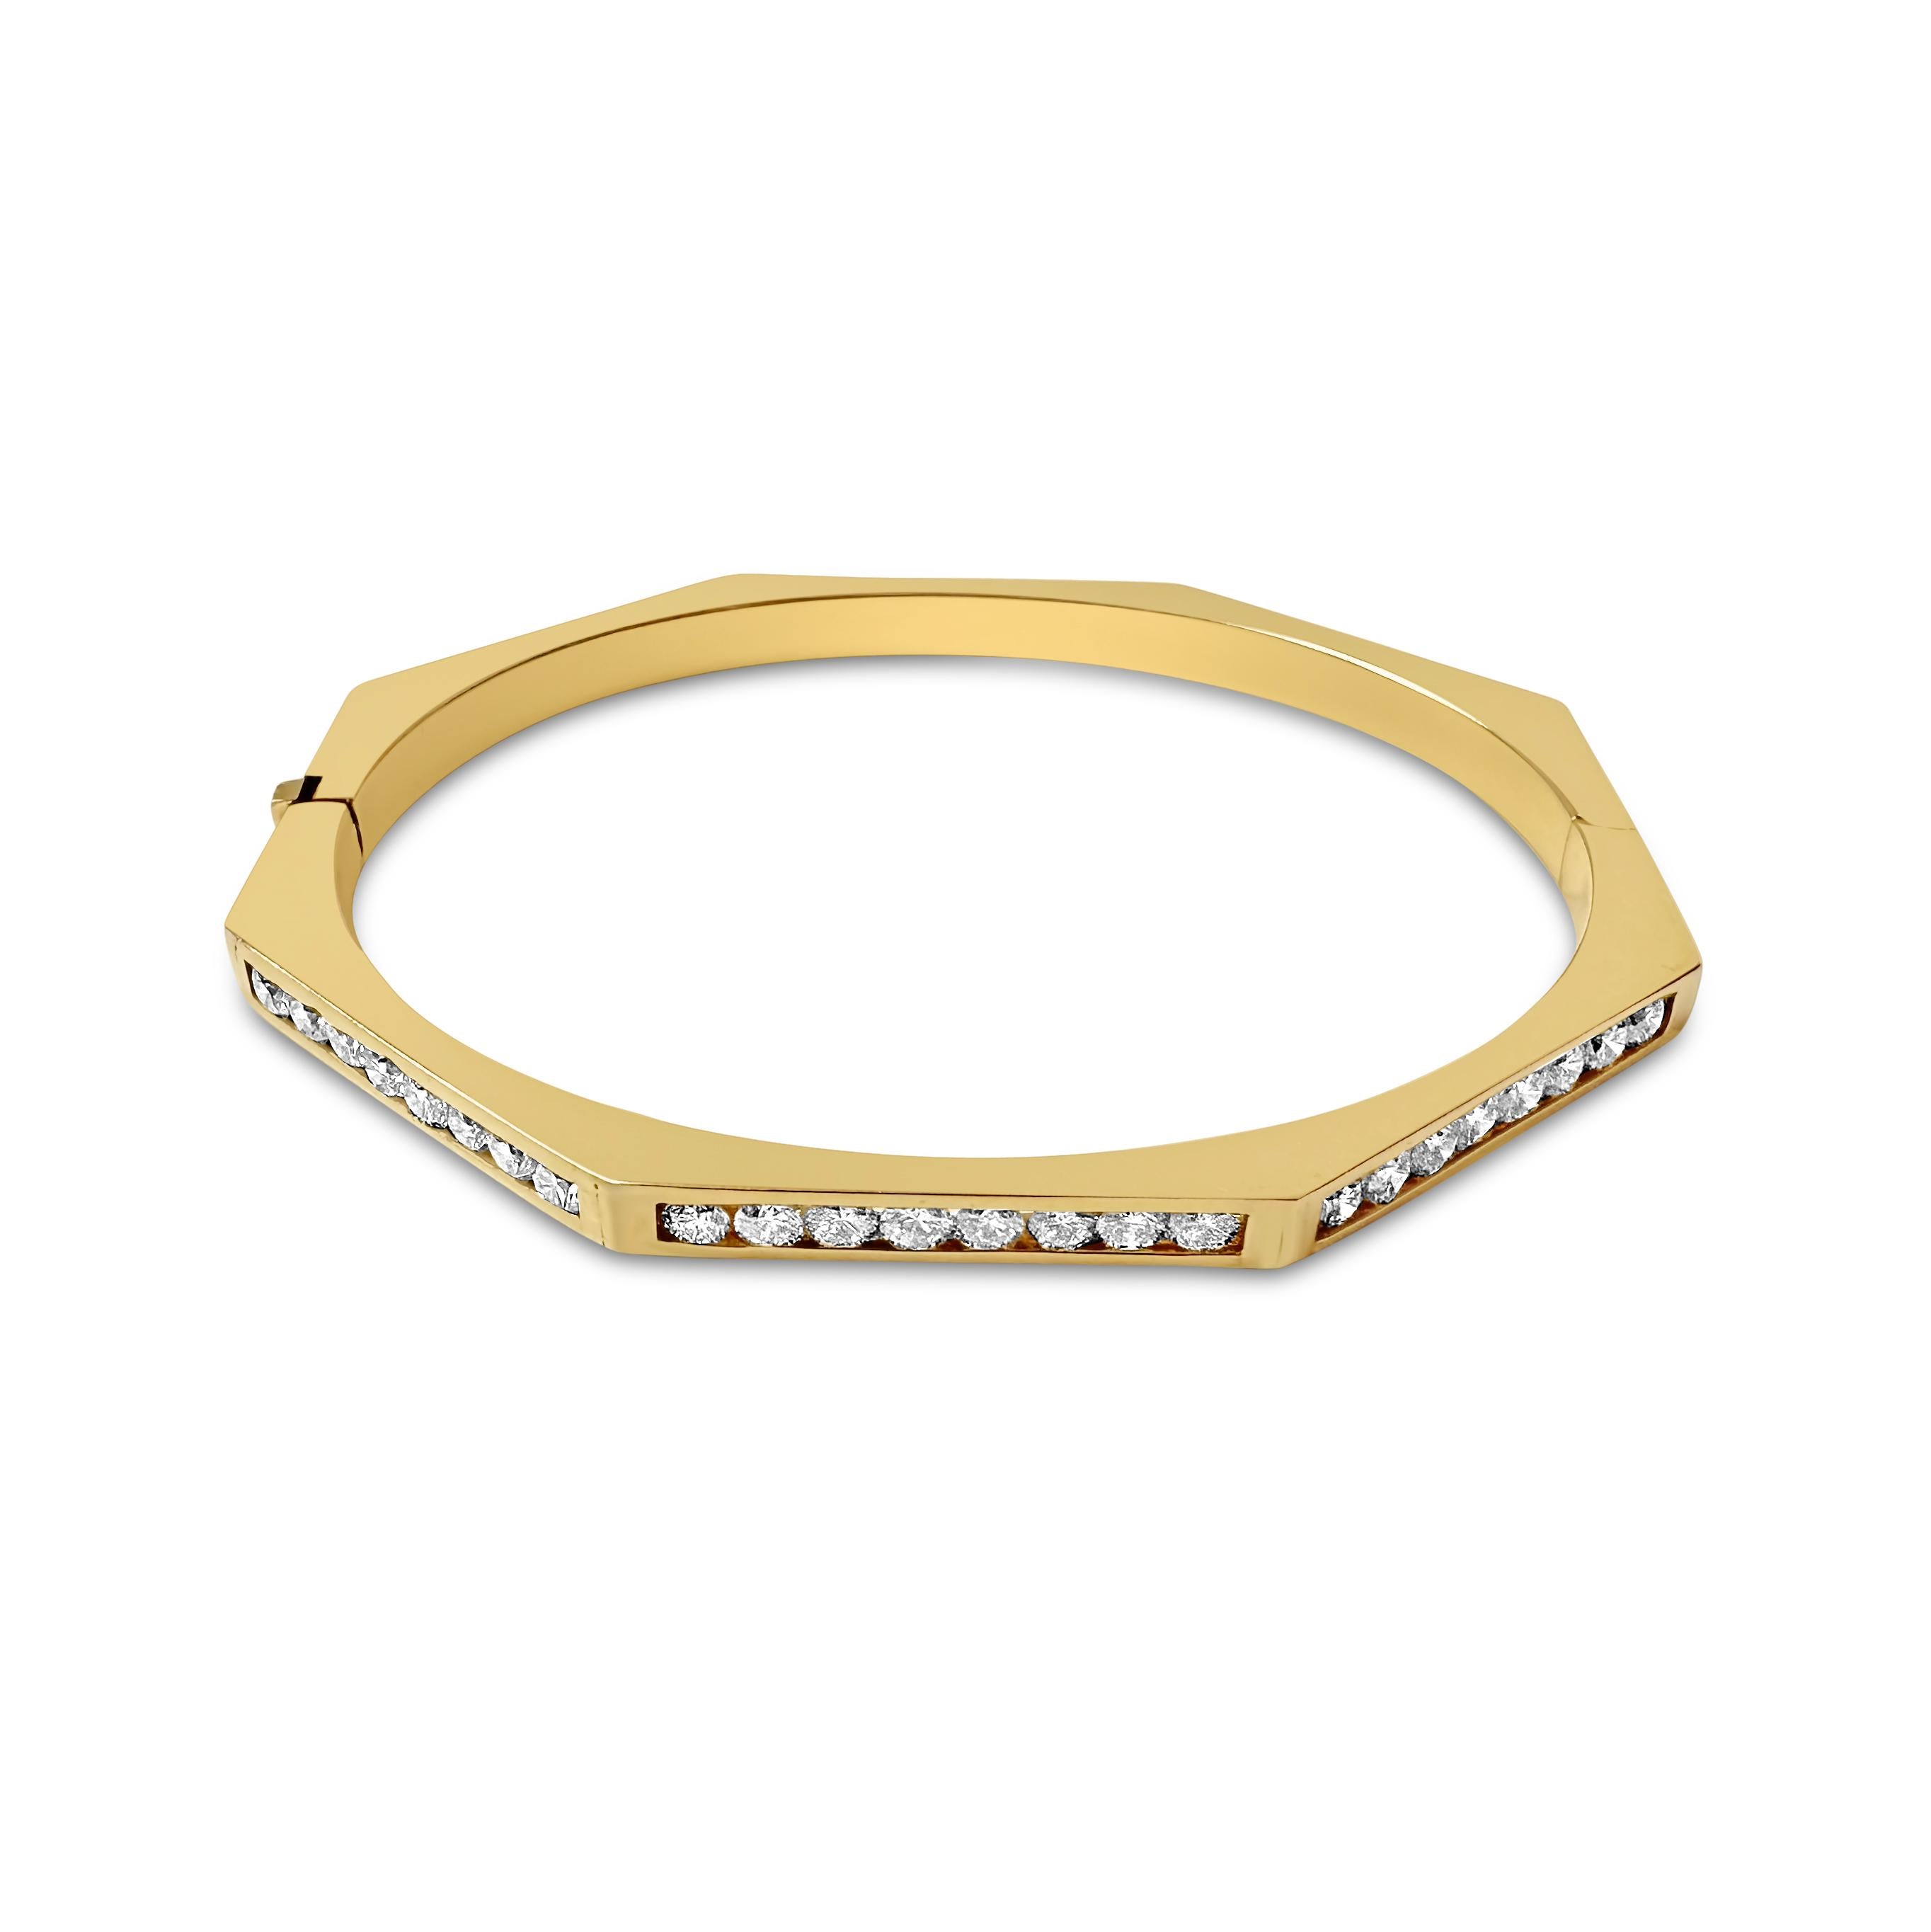 14KY Bracelet 3.8MM OCT with 27 Round 2.2mm Diamonds 1.30cts G-H VS-SI

Discover luxury in the 14K Yellow Gold 3.8MM OCT Bracelet by Manart Gold & Diamond Jewelry. Adorned with 27 2.2mm round diamonds, totalling 1.30cts, G-H colour, VS-SI clarity.